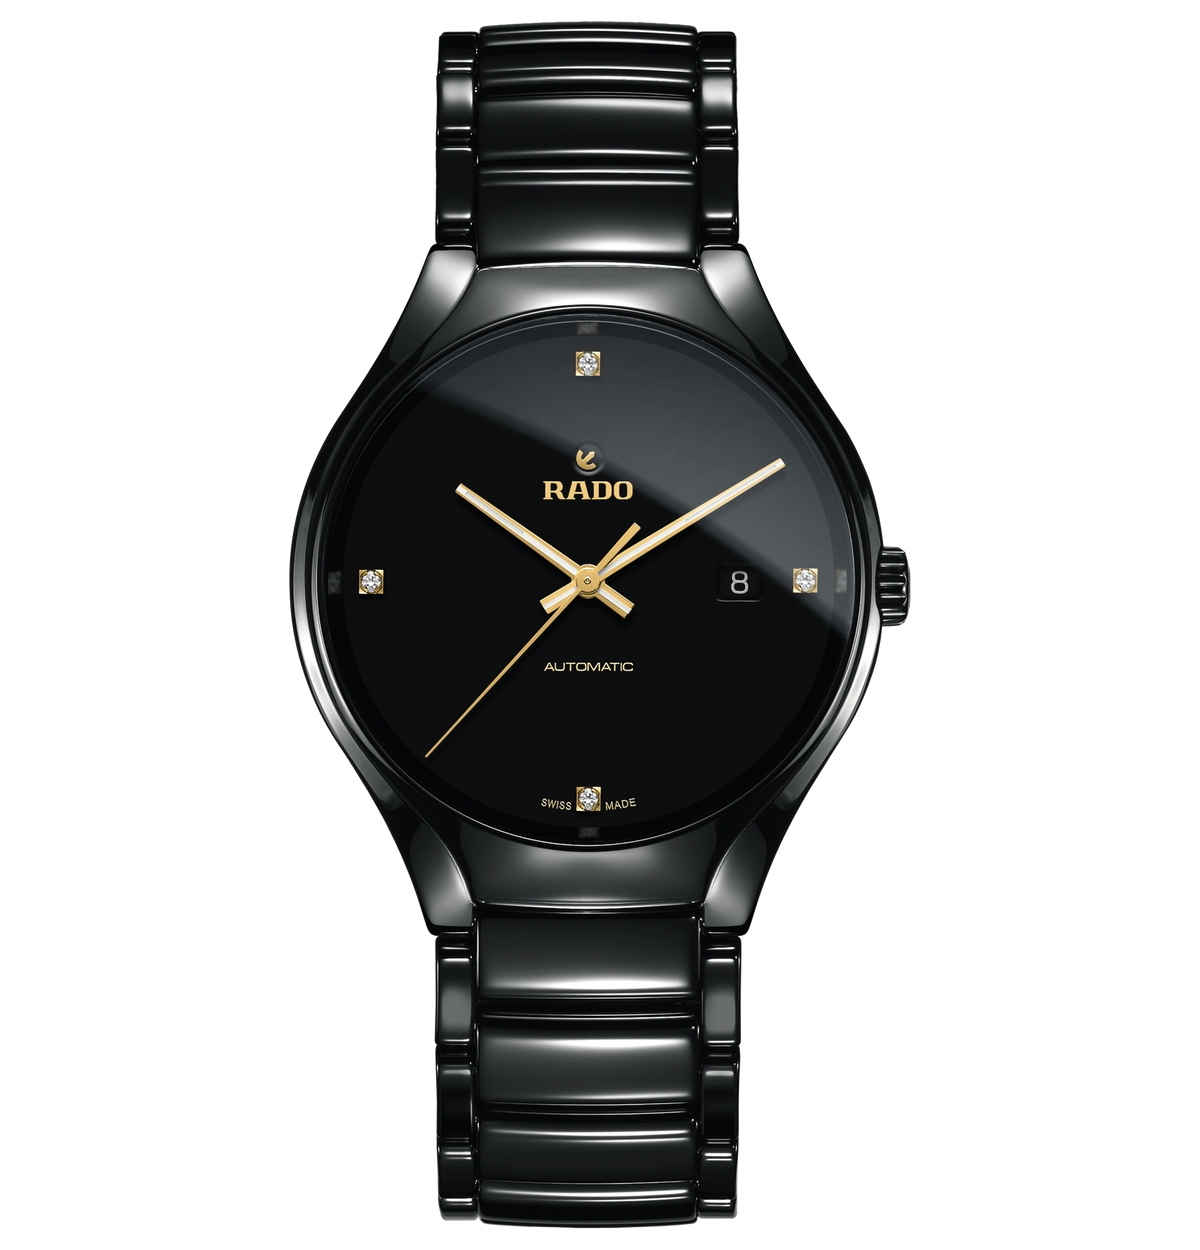 Amazon.com: Rado Men's Centrix Open Heart Swiss Automatic Watch,  Black/Stainless (R30178152) : Clothing, Shoes & Jewelry